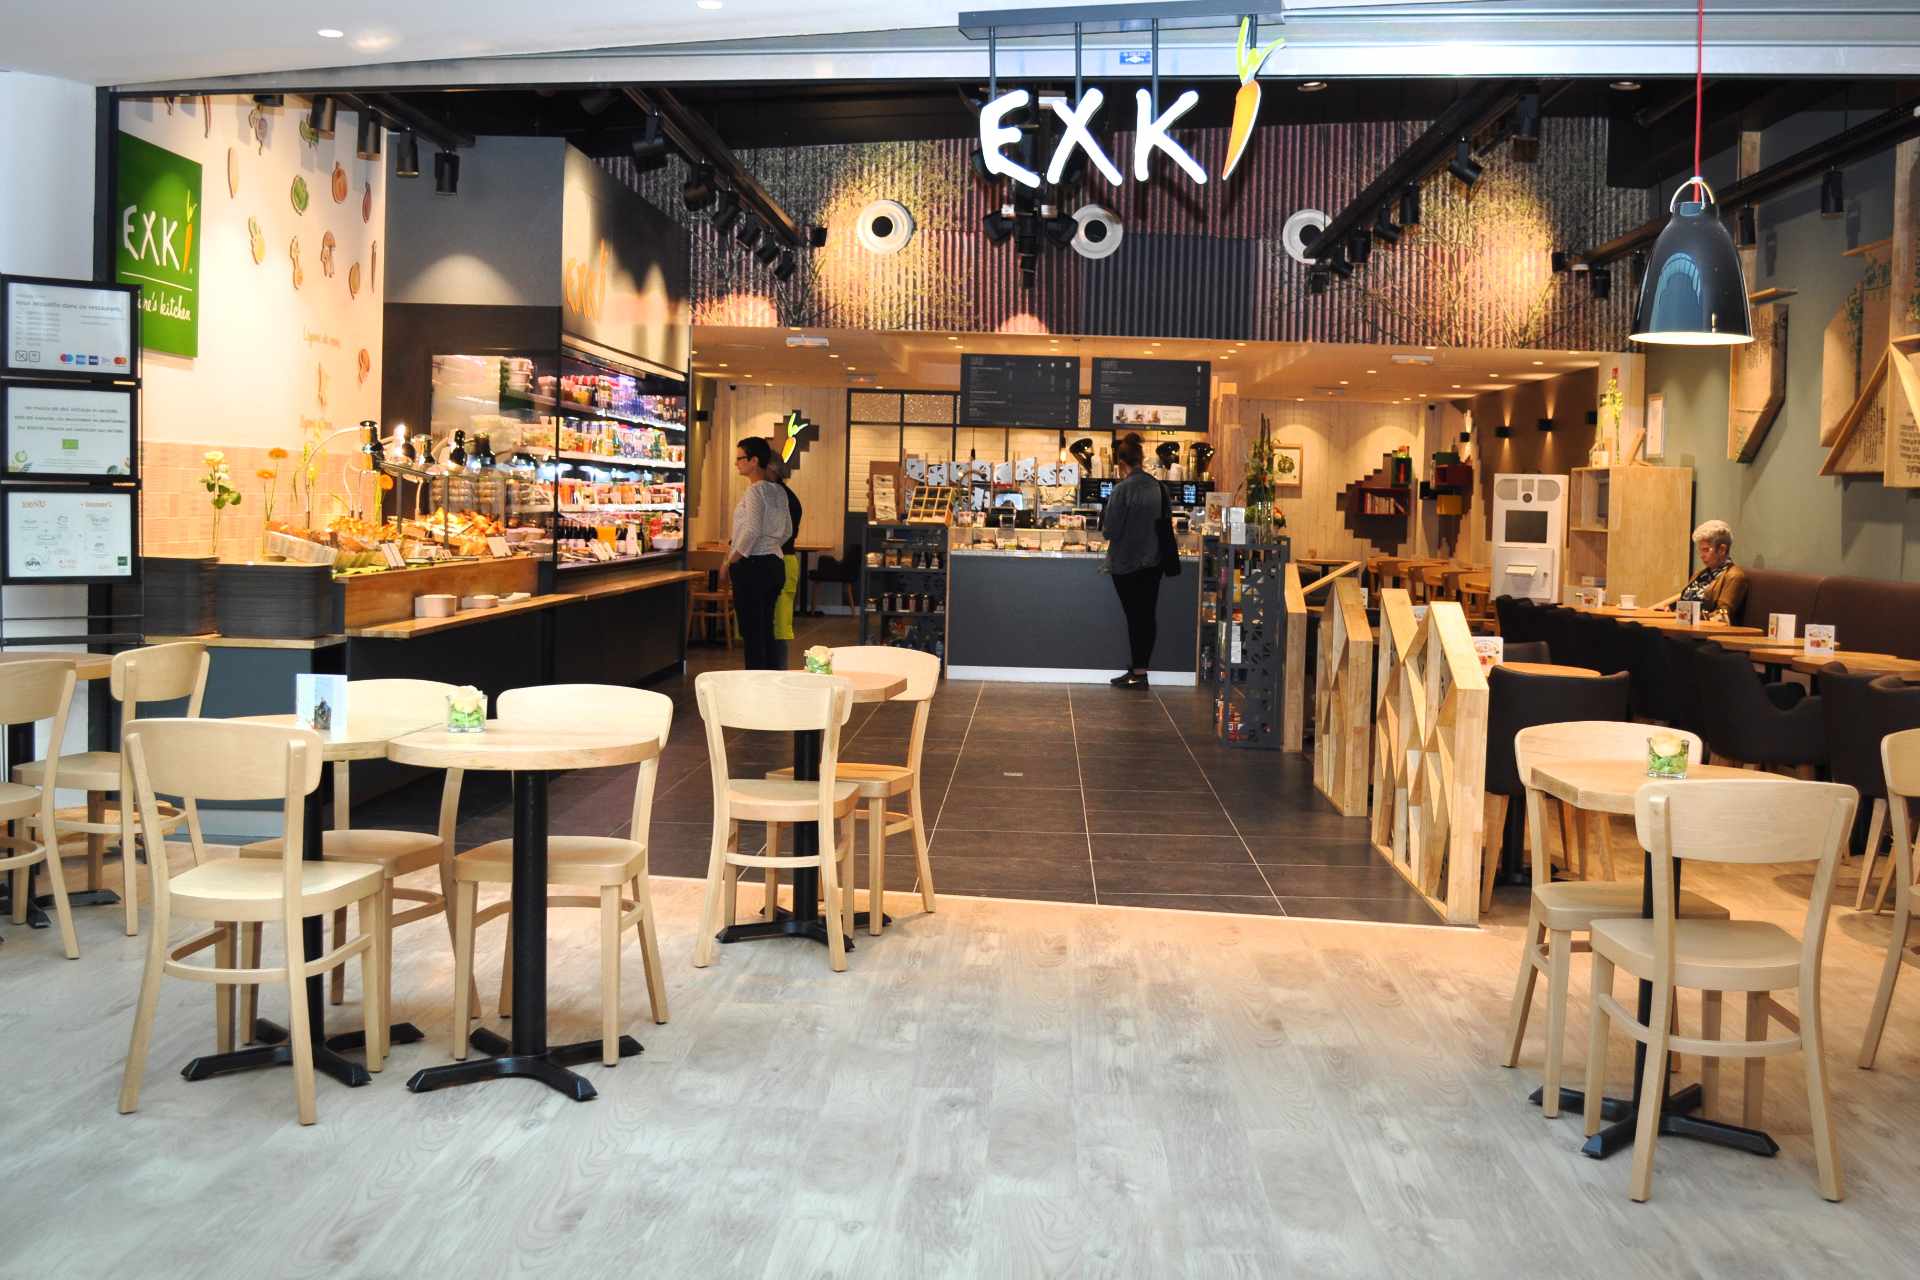 exki-takeaway-cafe-with-tables-and-chairs